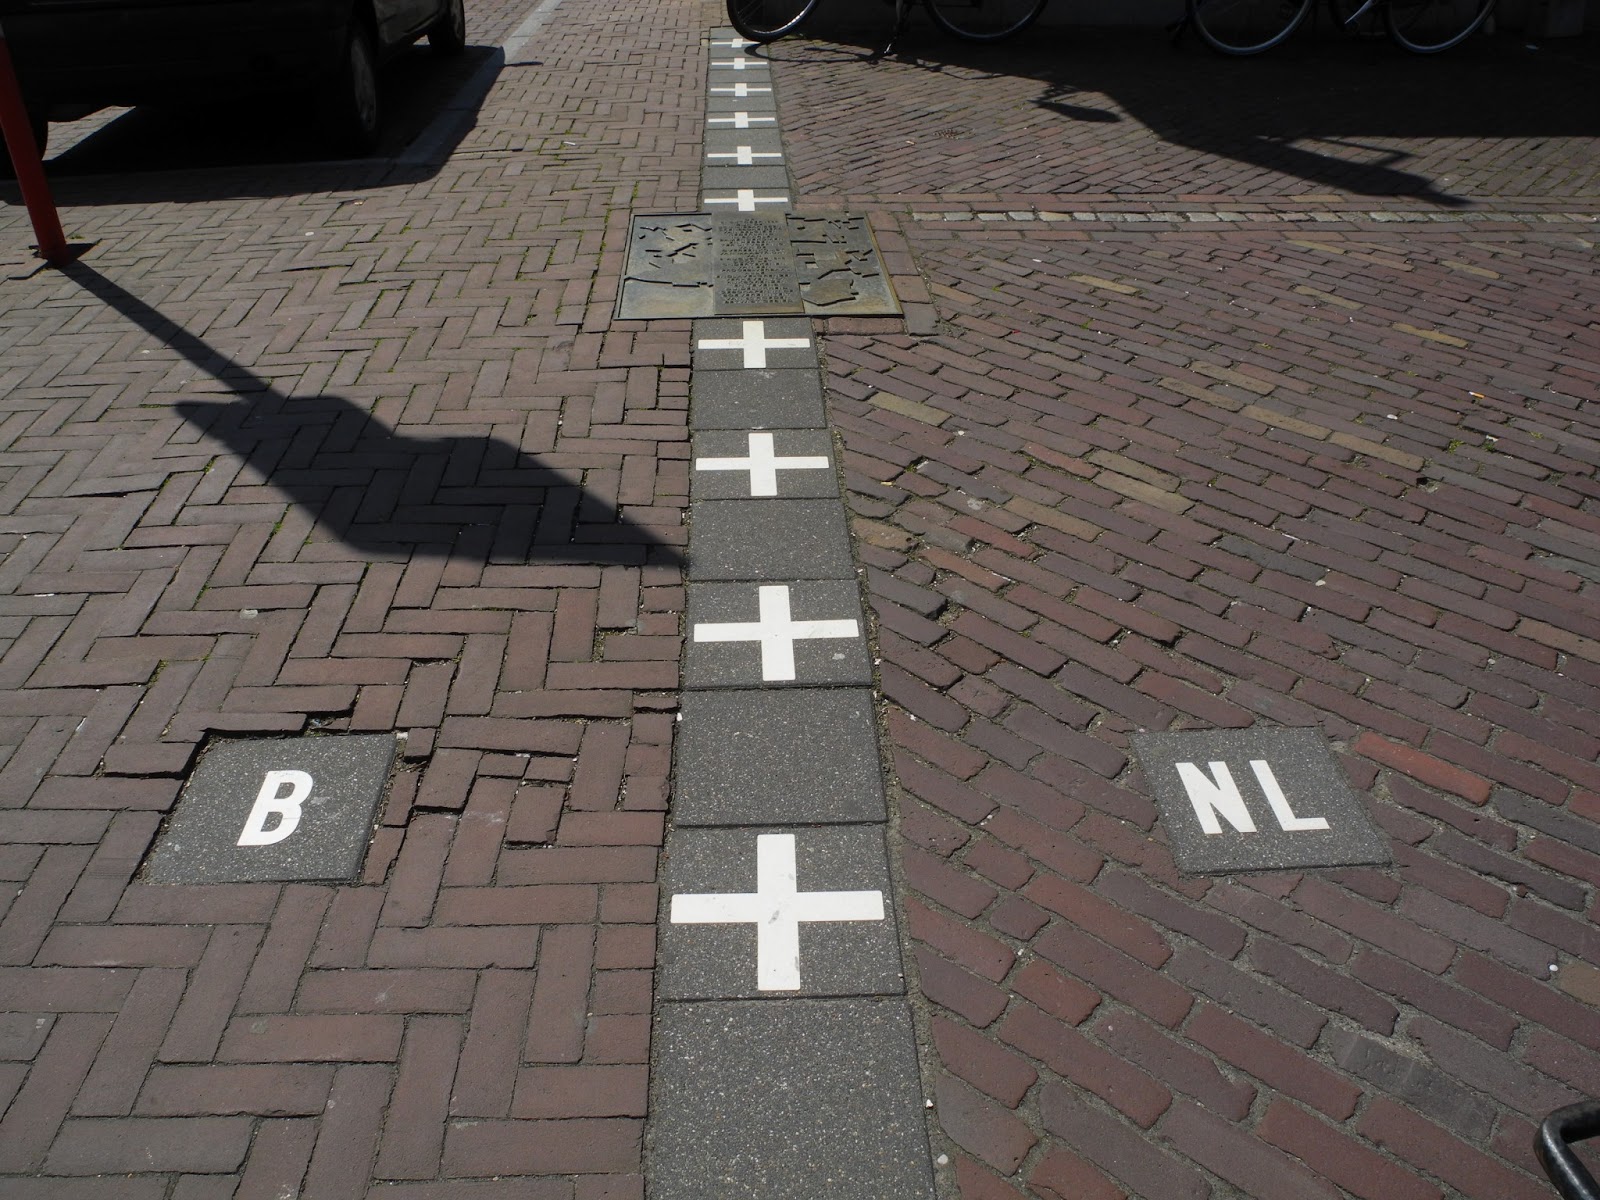 Two countries next to each other .. Border between Belgium